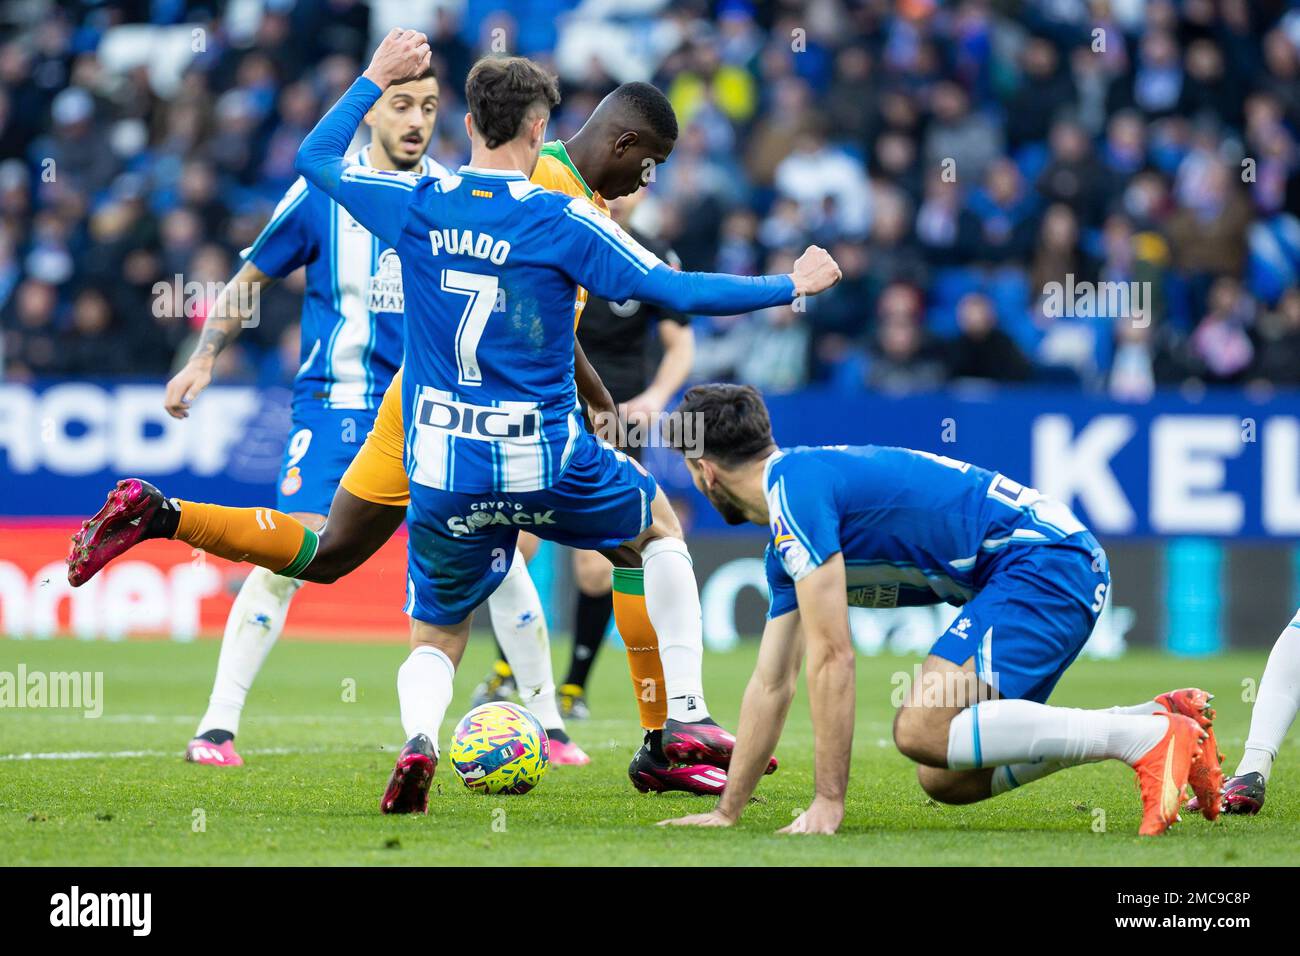 Luiz Enrique of Real Betis during the Liga match between RCD Espanyol and Real Betis at RCDE Stadium in Cornella, Spain. Stock Photo